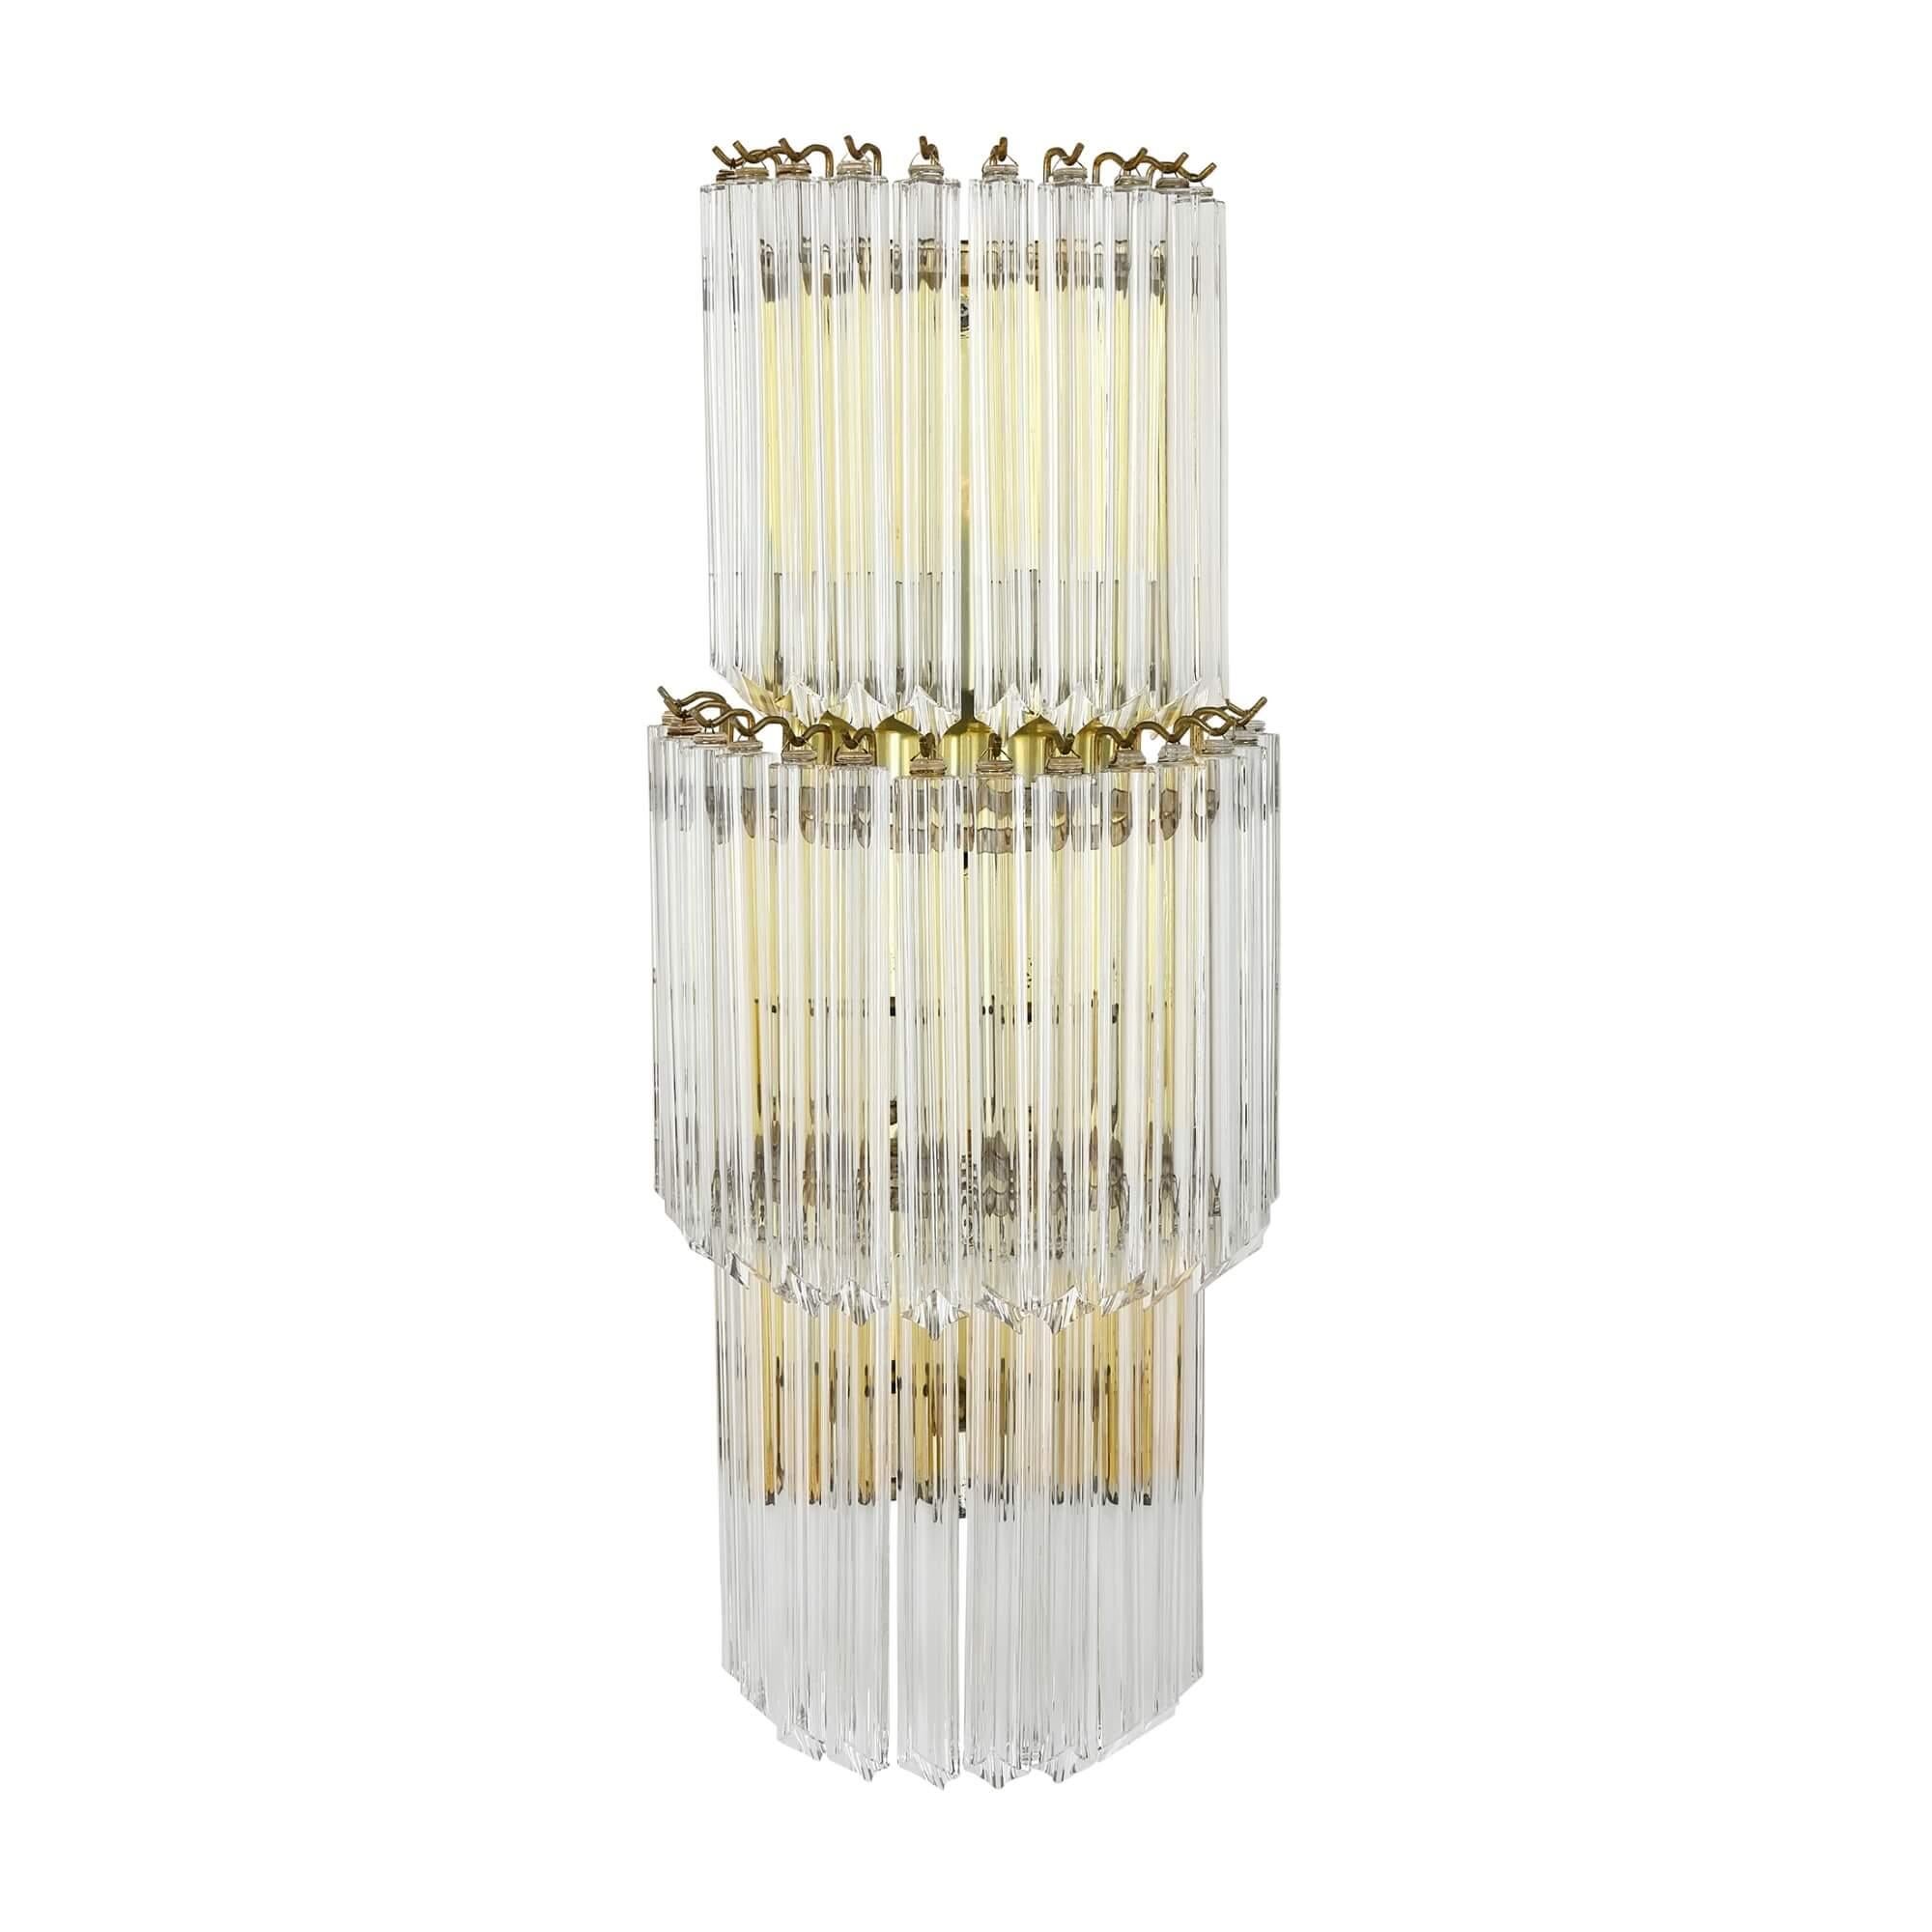 Pair of midcentury Murano glass wall lights by Camer
Italian, Mid-20th century 
Height 82cm, width 33cm, depth 19cm

Made out of Murano glass and brass, this pair of wall lights is a demonstration of high-quality Italian design. 

Individual